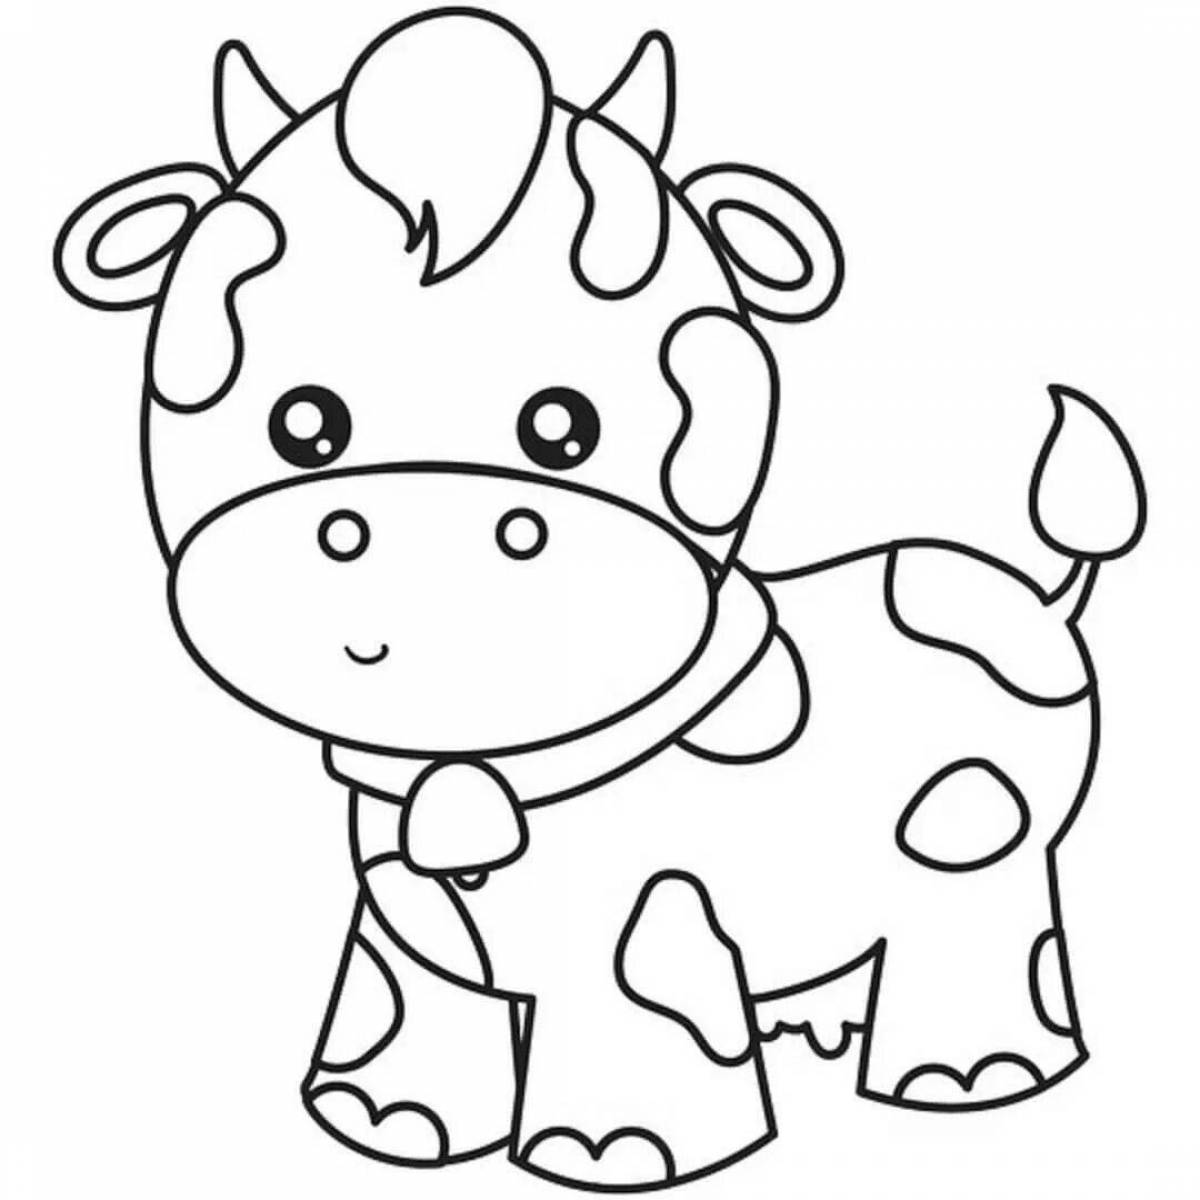 Funny cow coloring book for kids